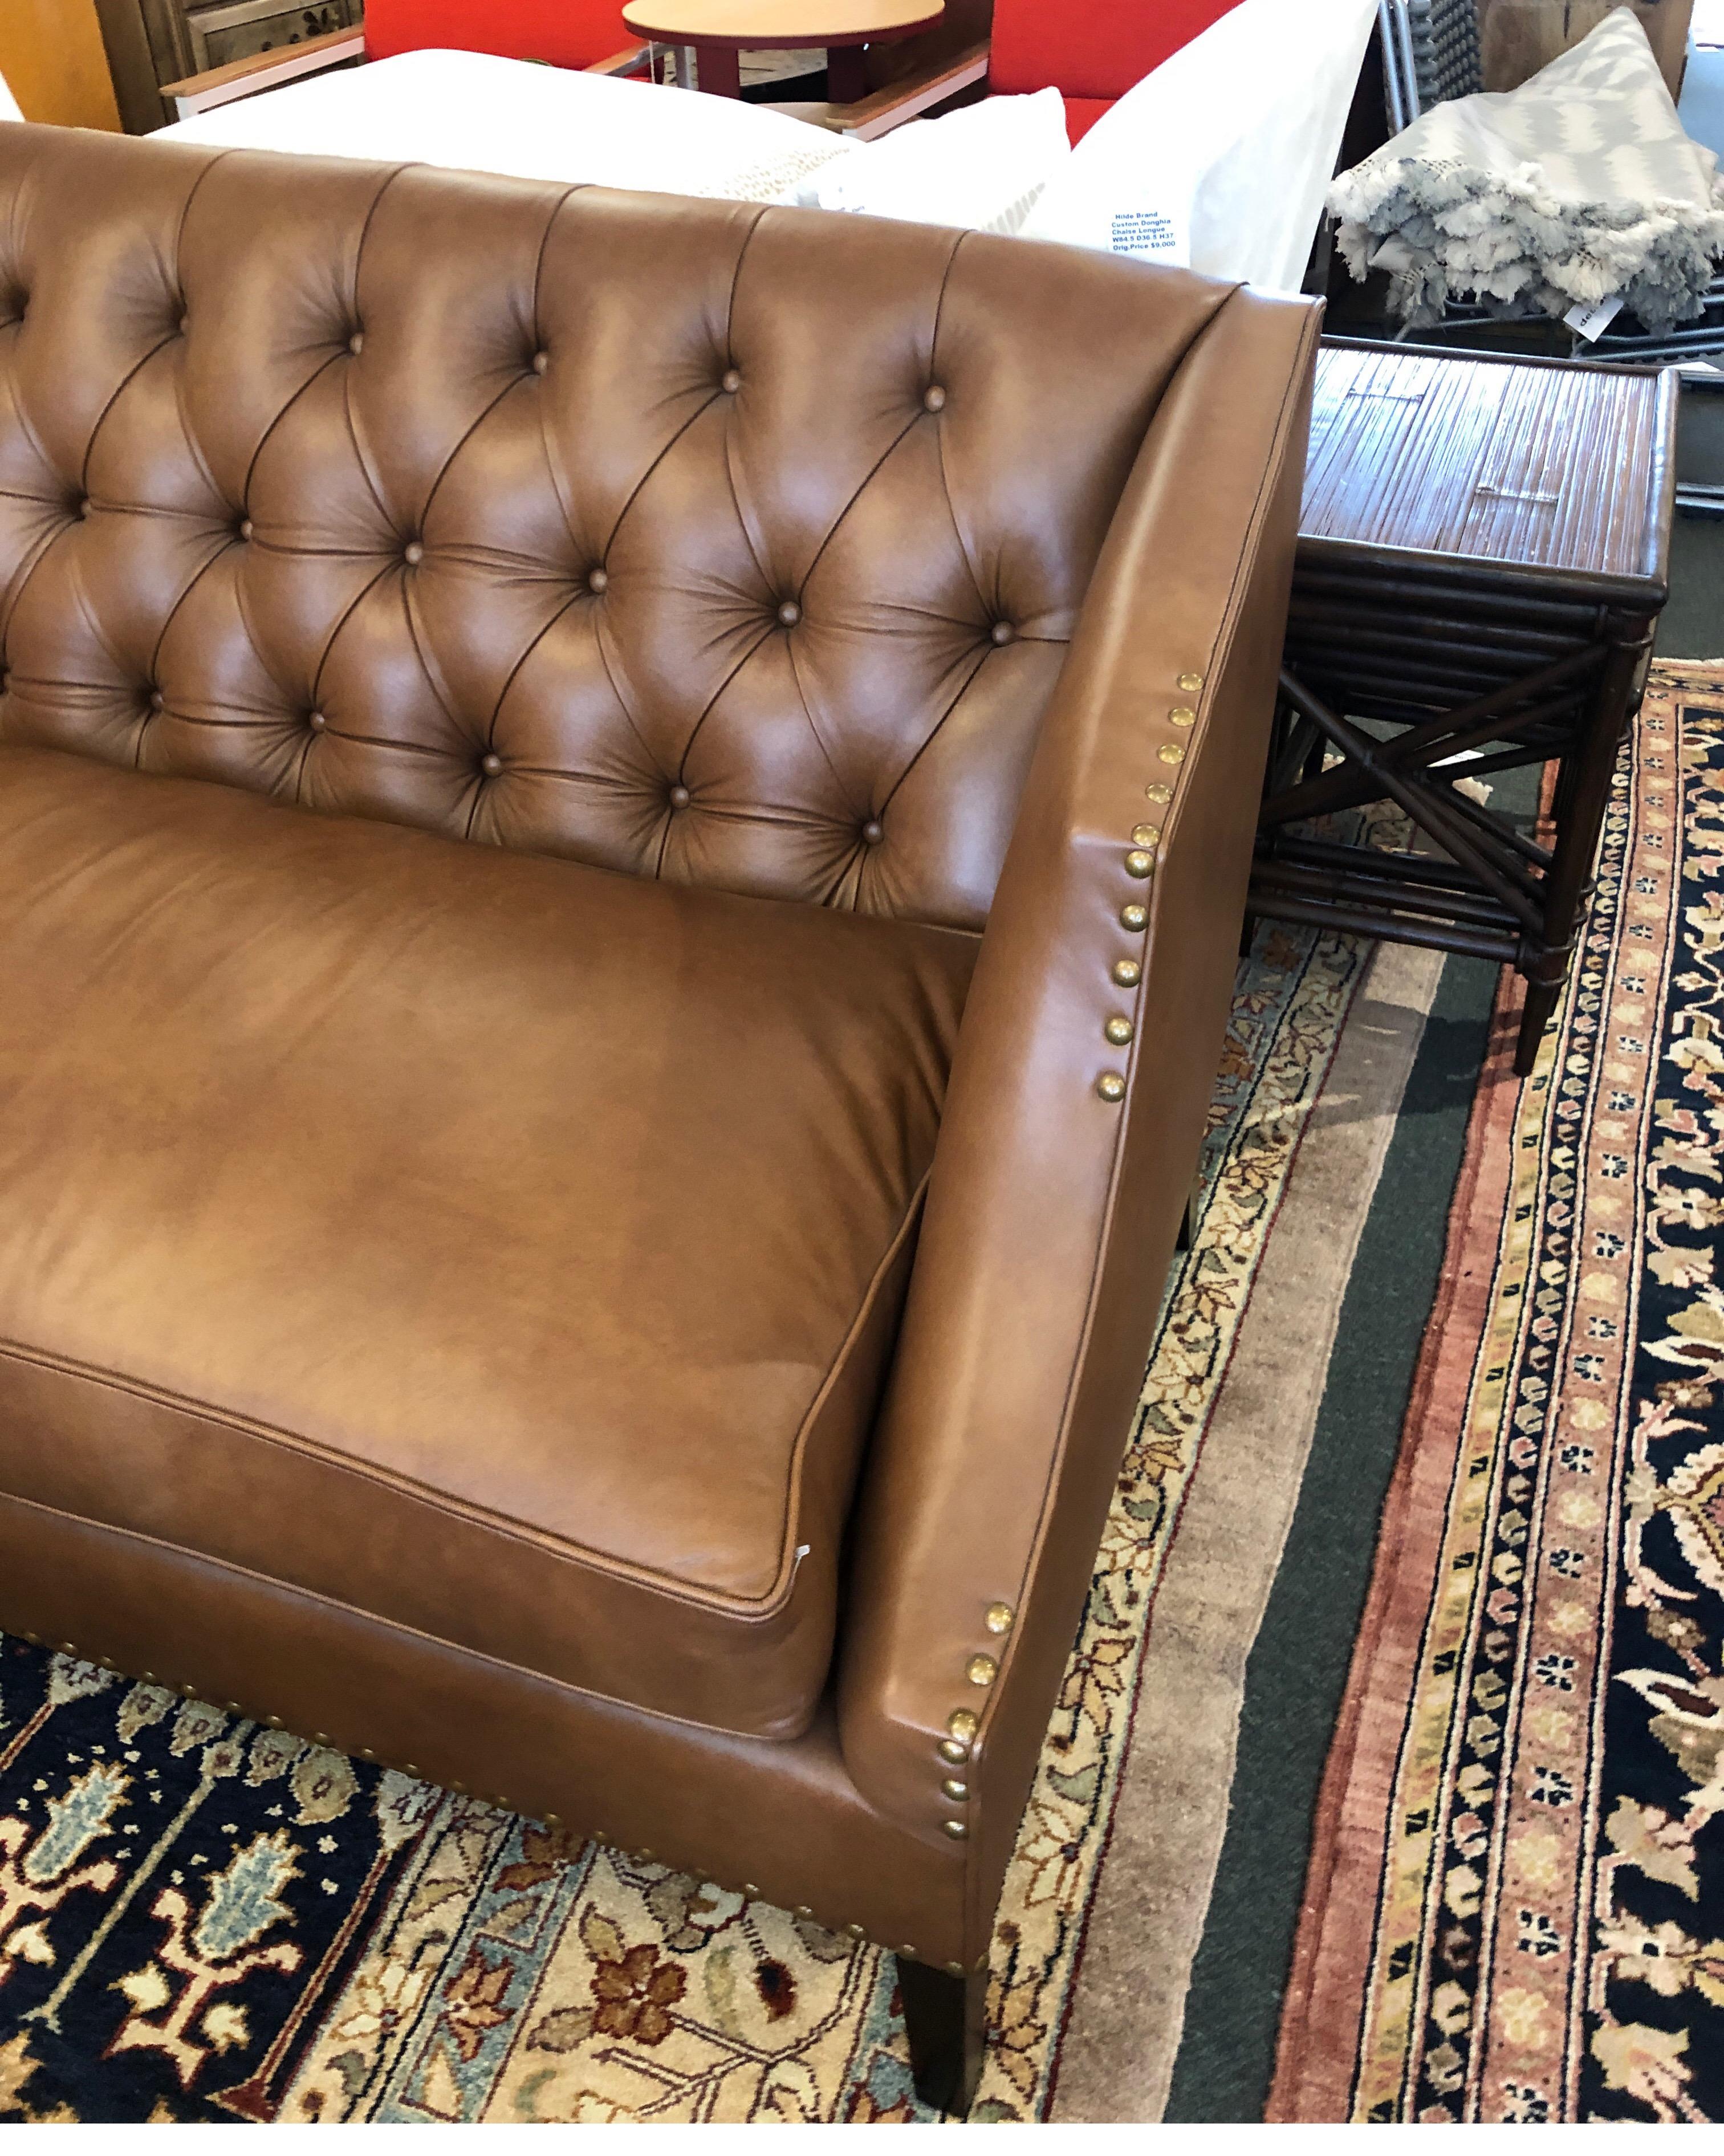 It presents a new becki sofa from leathercraft. Beautiful tufted terracotta leather is the star on this Classic piece, with antique pewter nailhead detailing. Tapered maple legs are finished for subtle contrast. Seat cushion is feather and fiber